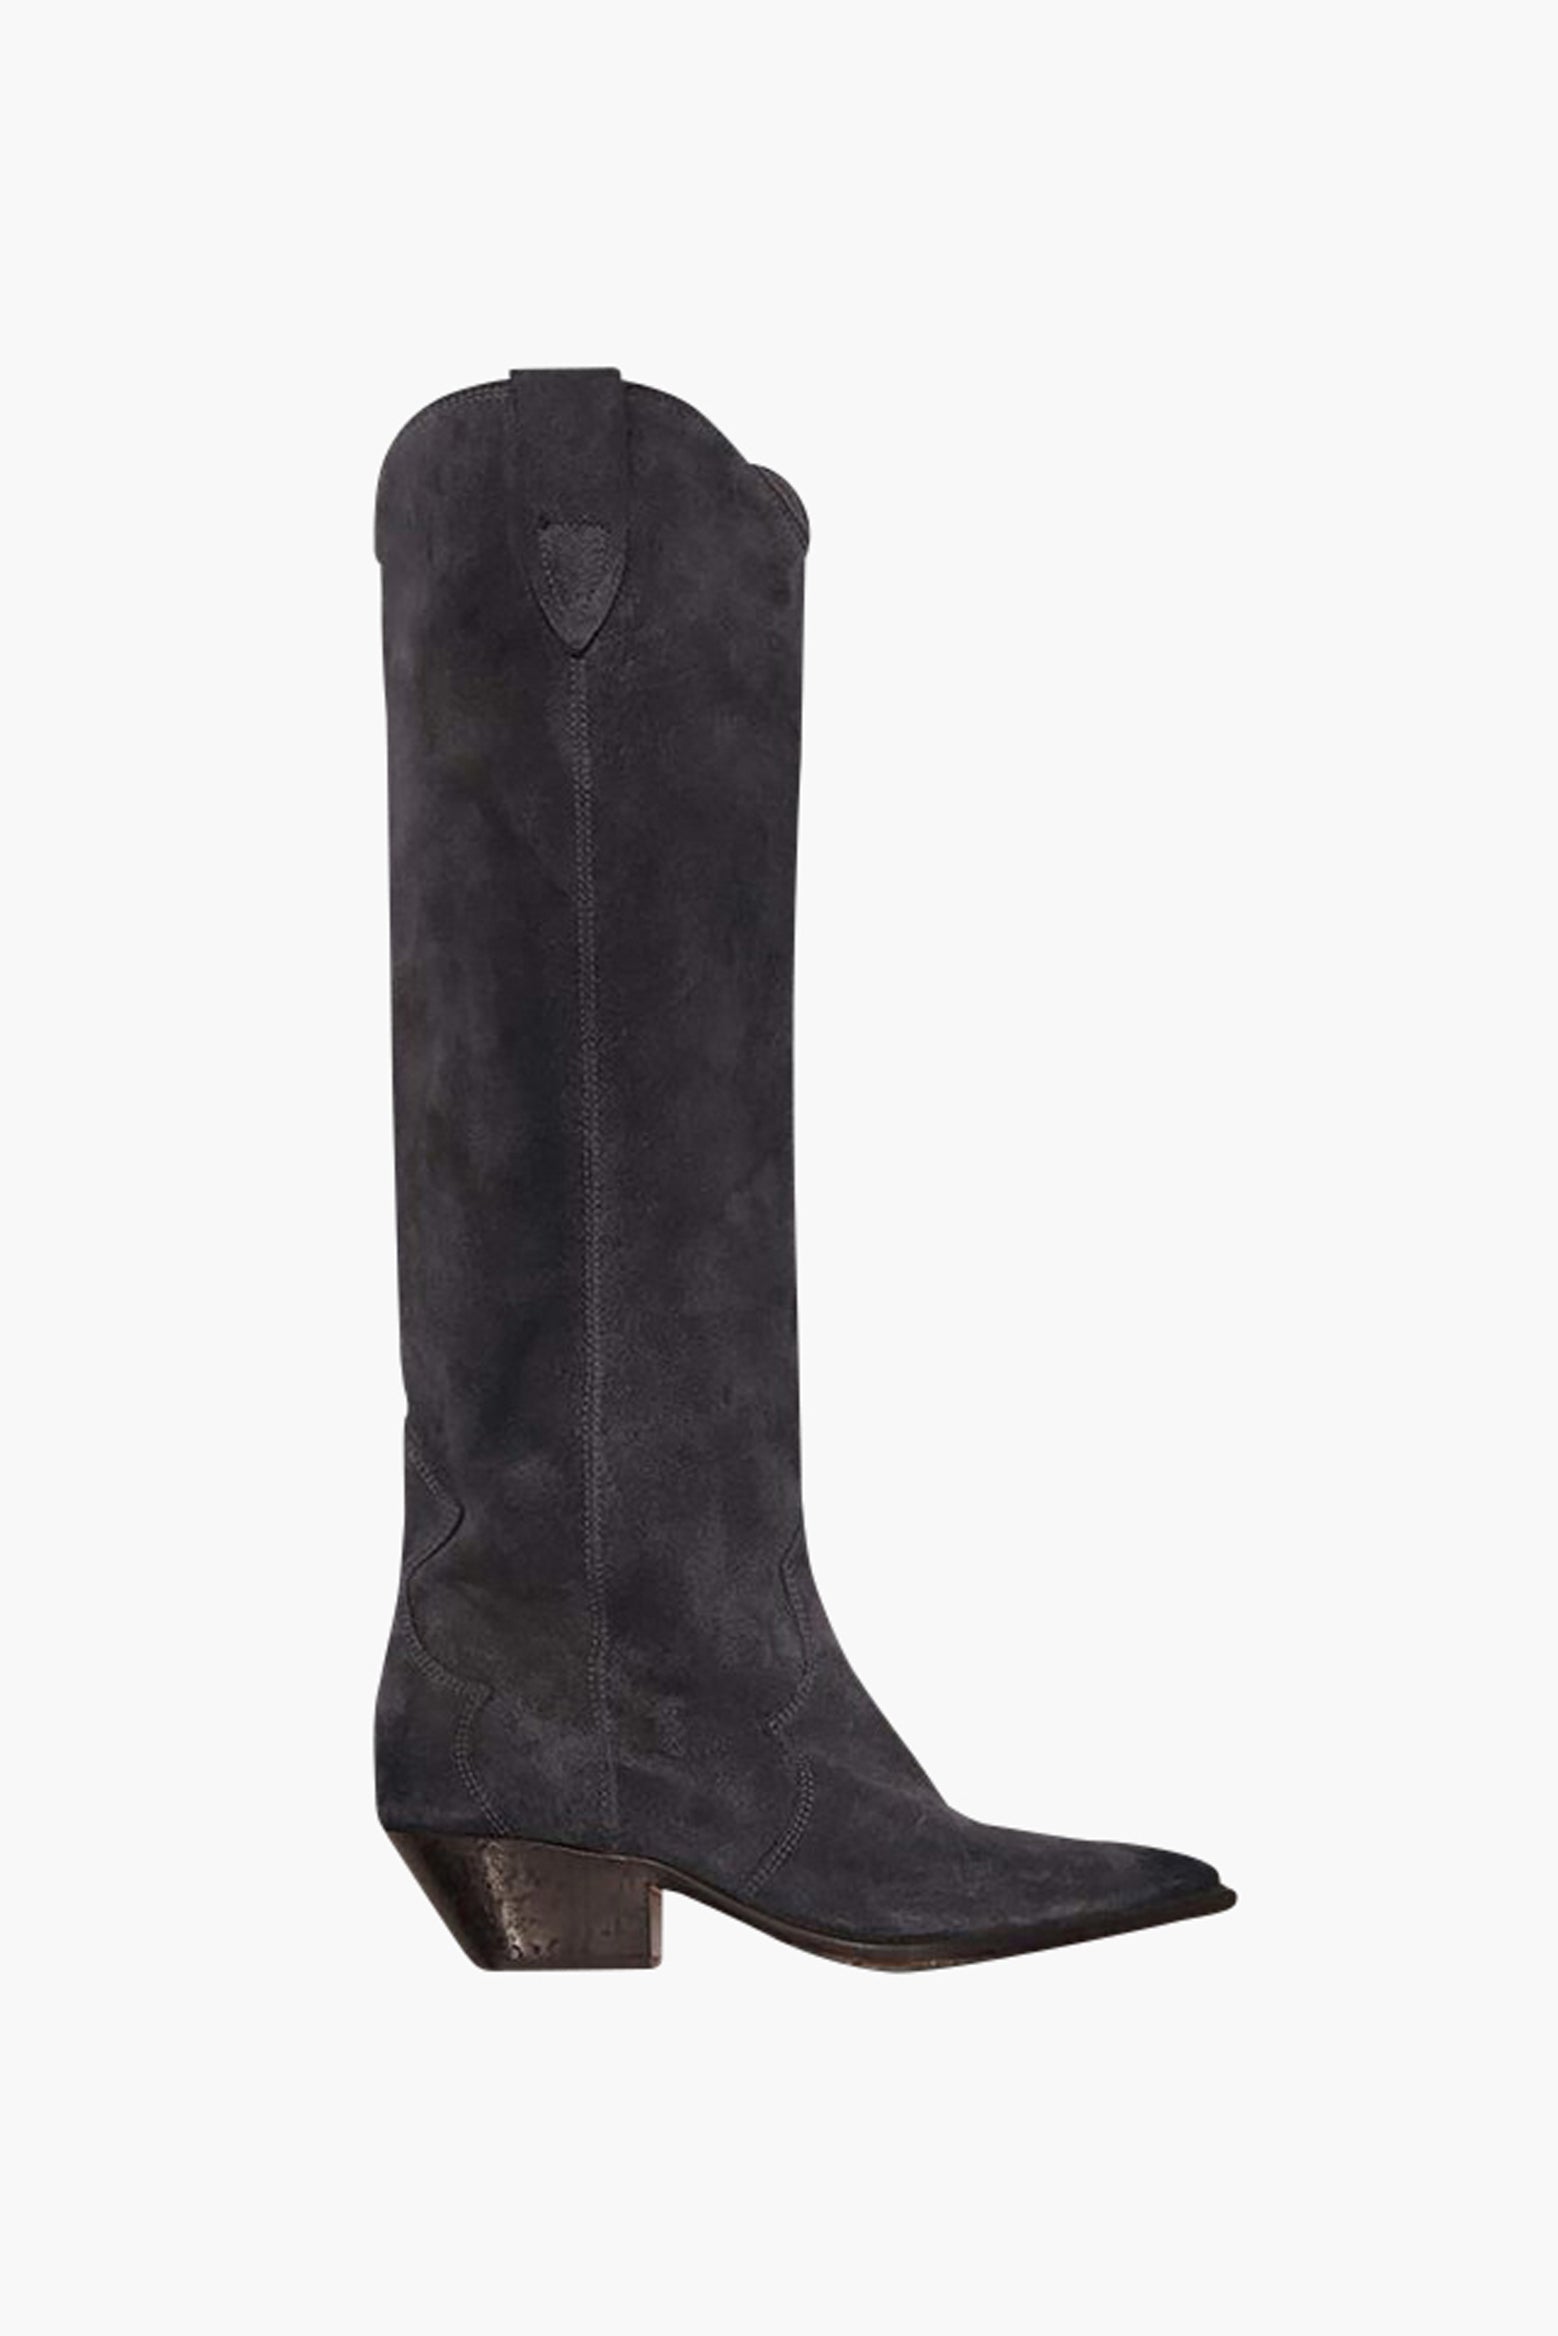 Isabel Marant Denvee Boots in Faded Black from The New Trend